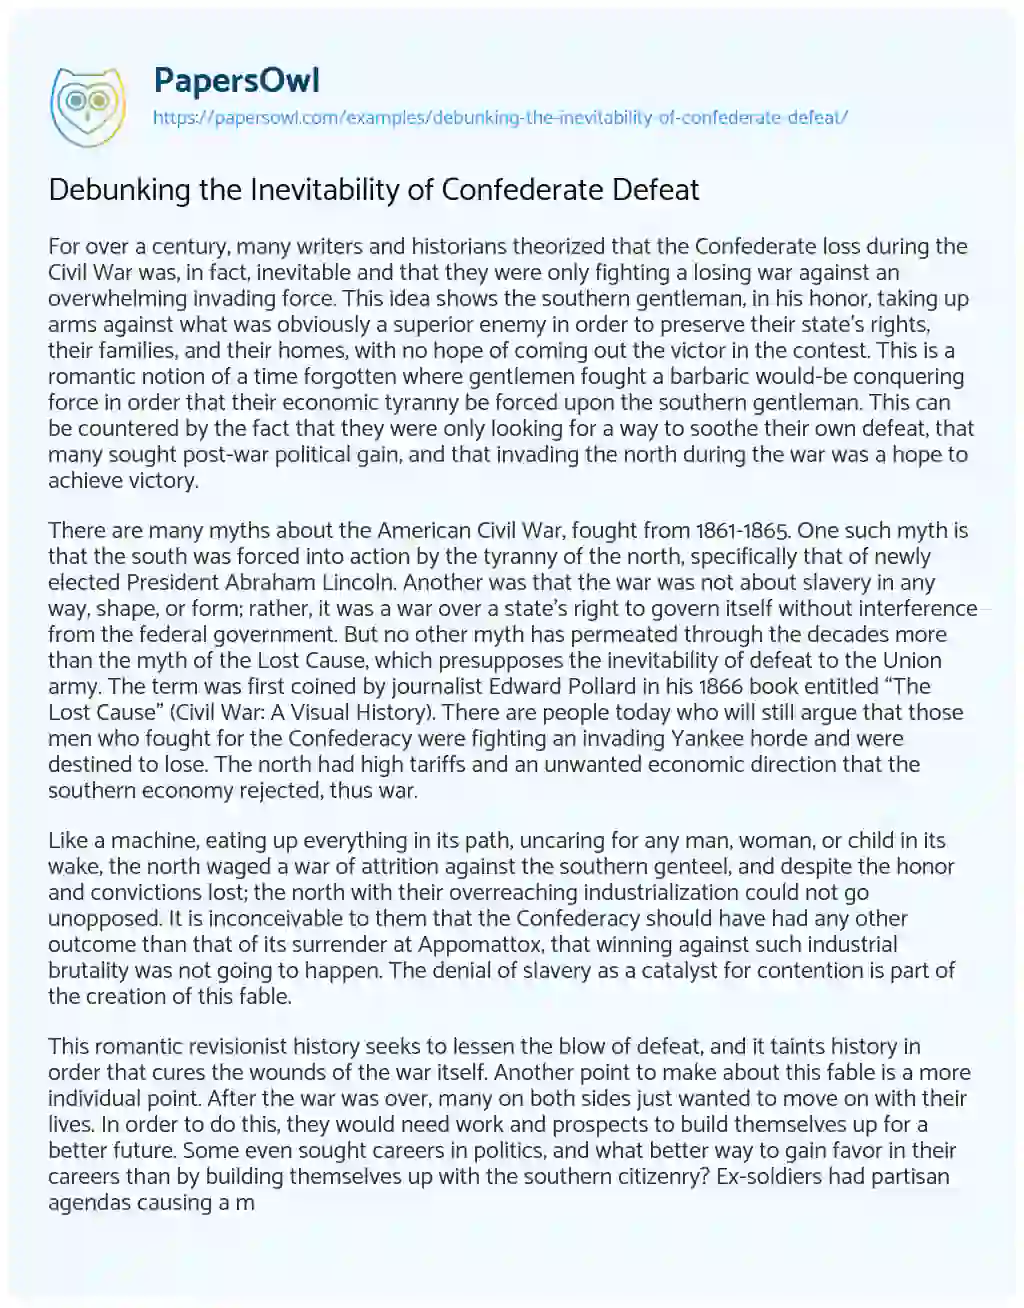 Essay on Debunking the Inevitability of Confederate Defeat